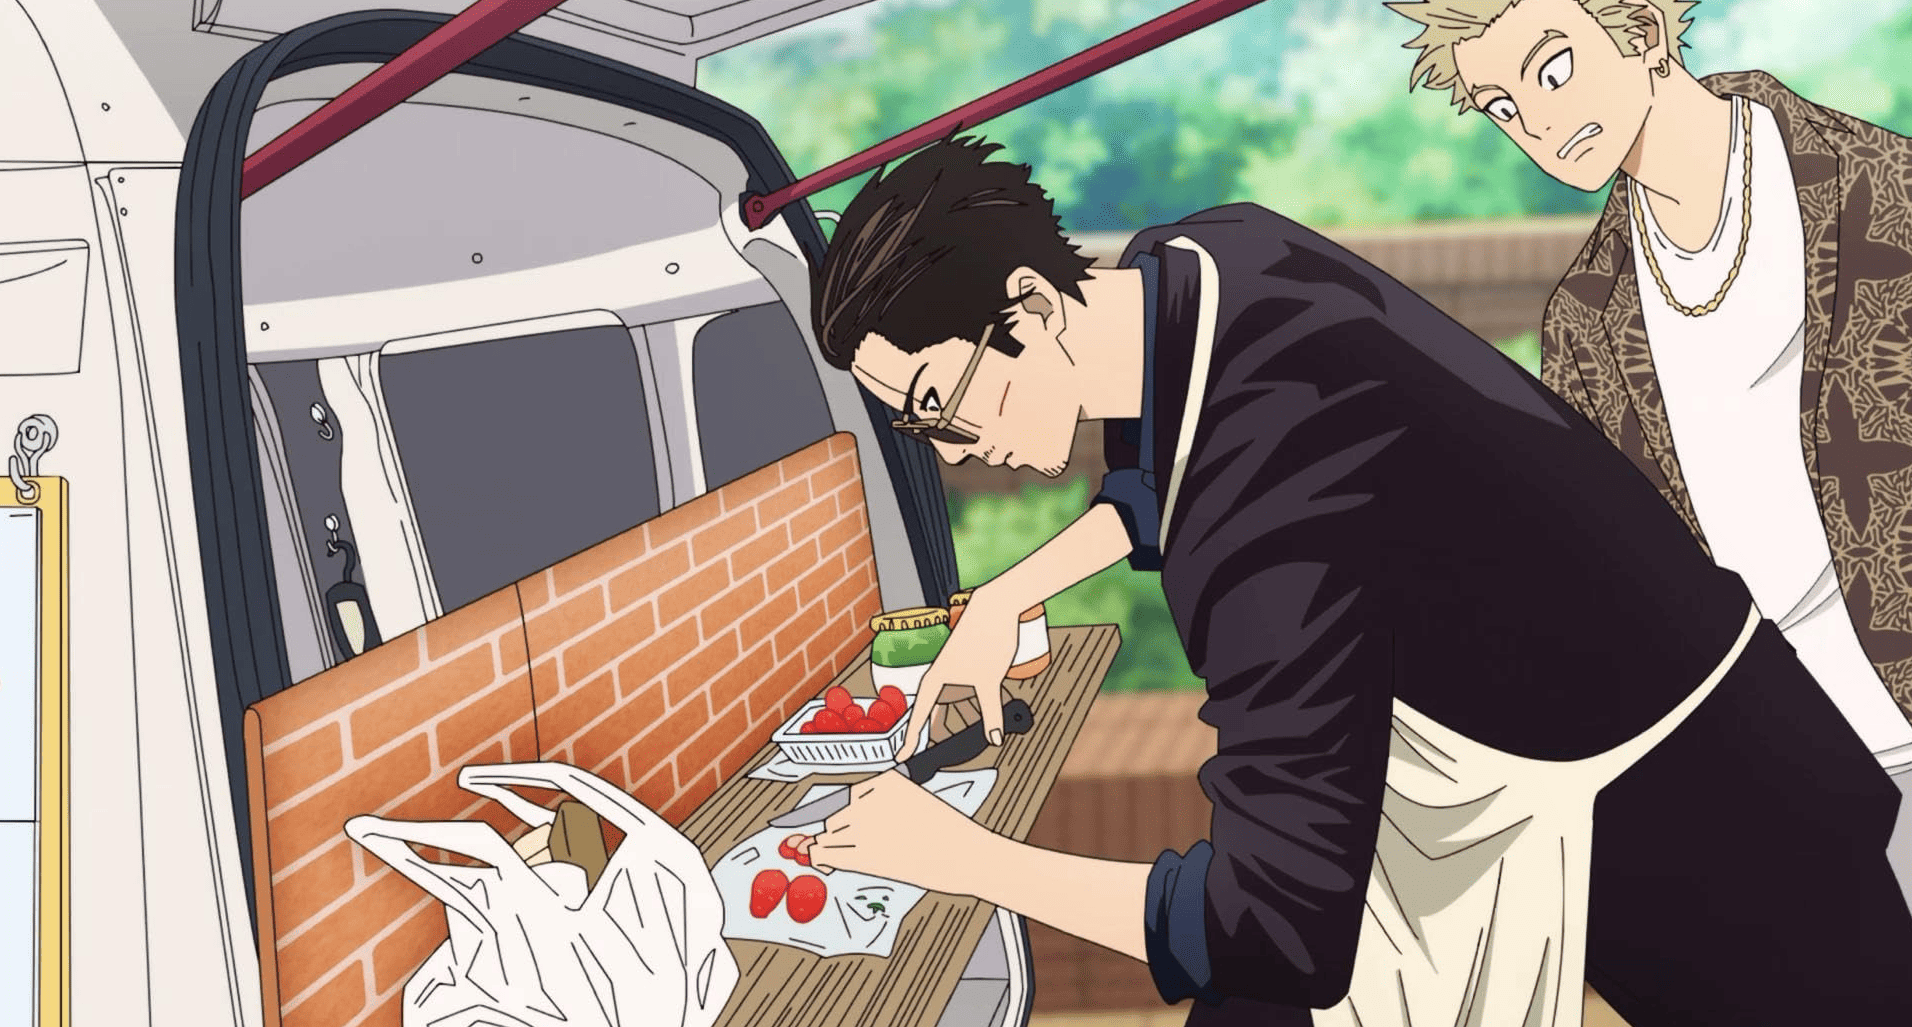 A man makes dessert in a food truck in this image from J.C. Staff.